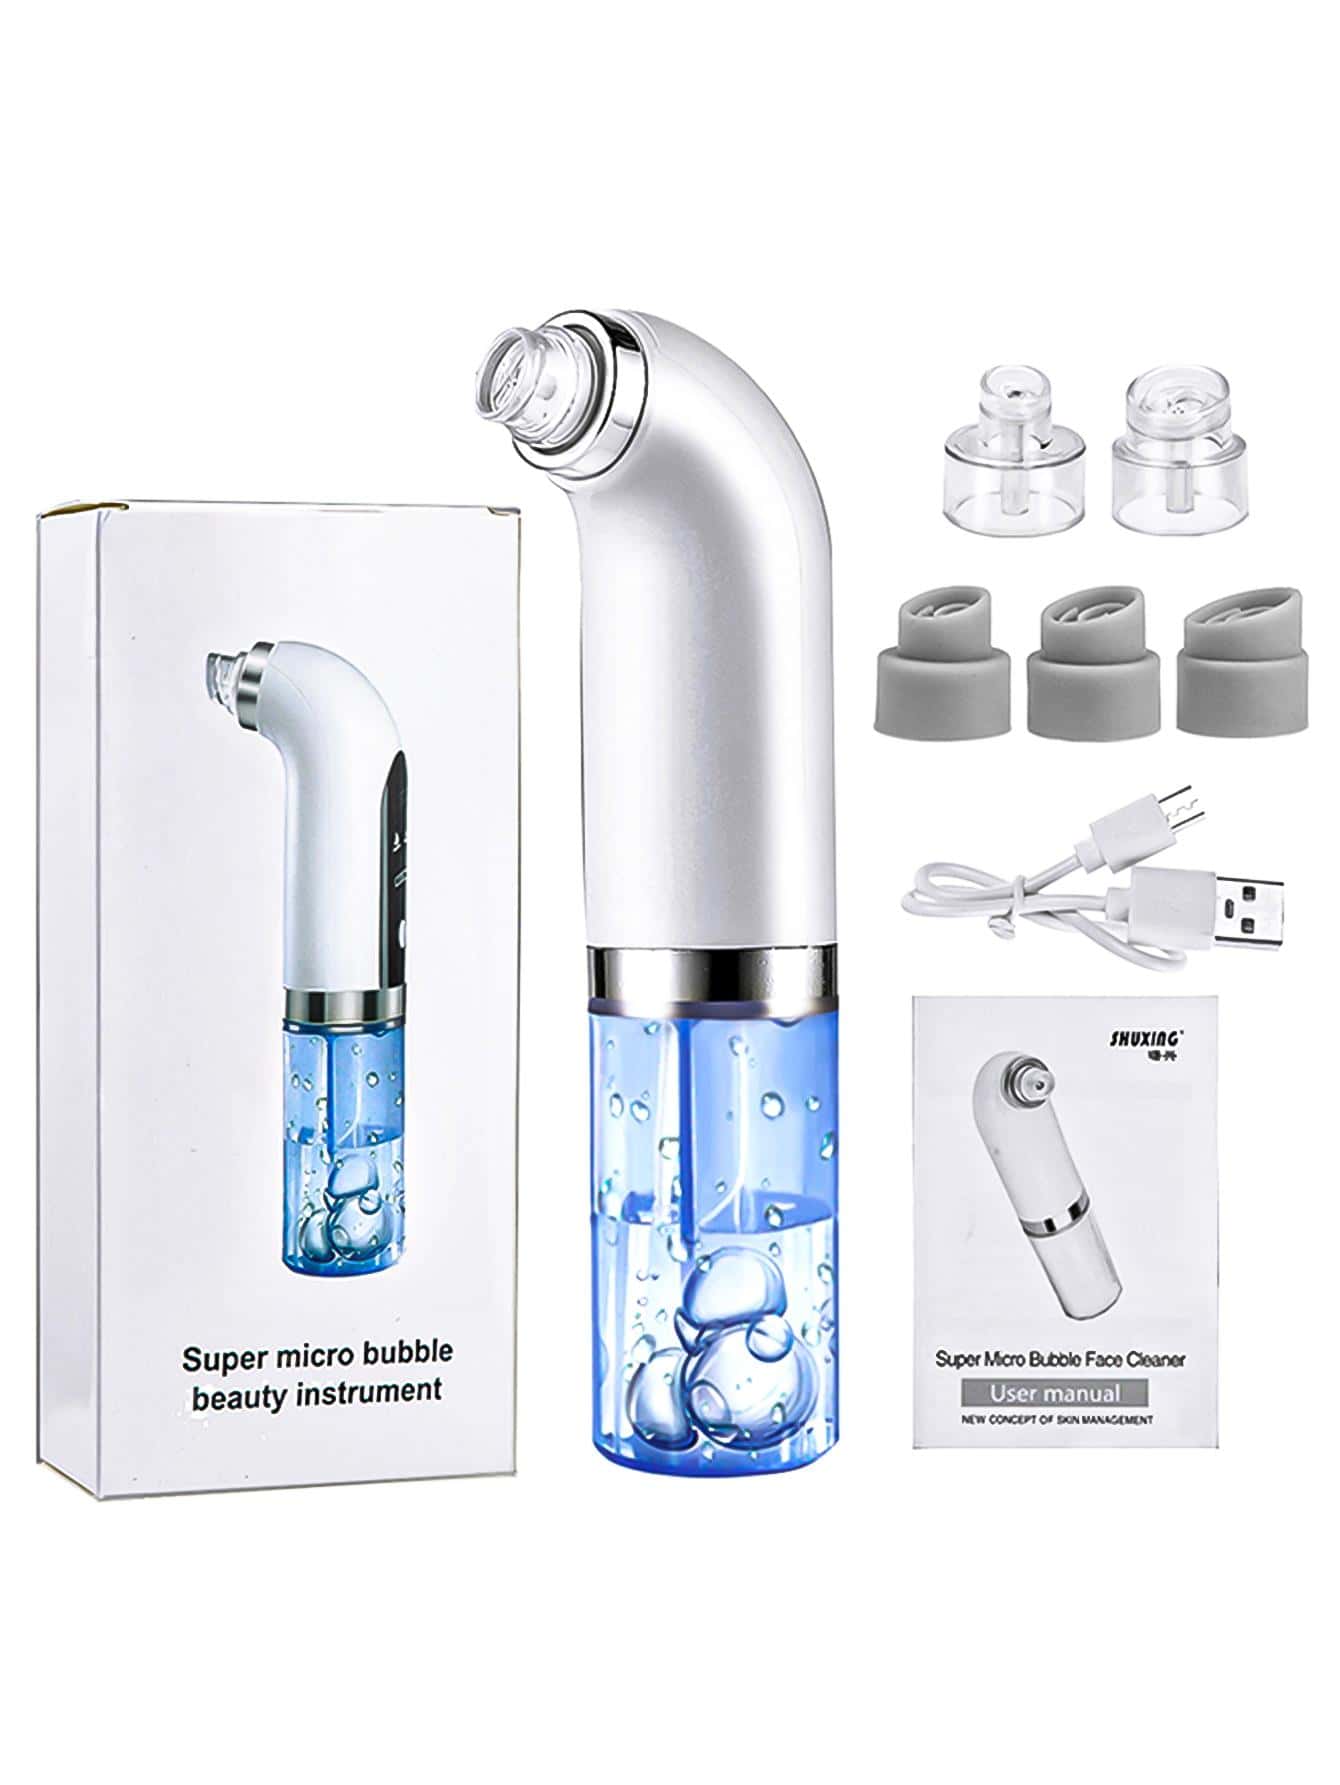 Vacuum Suction Blackhead Remover Pore Cleaner Face Cleaning Acne Removal Kit